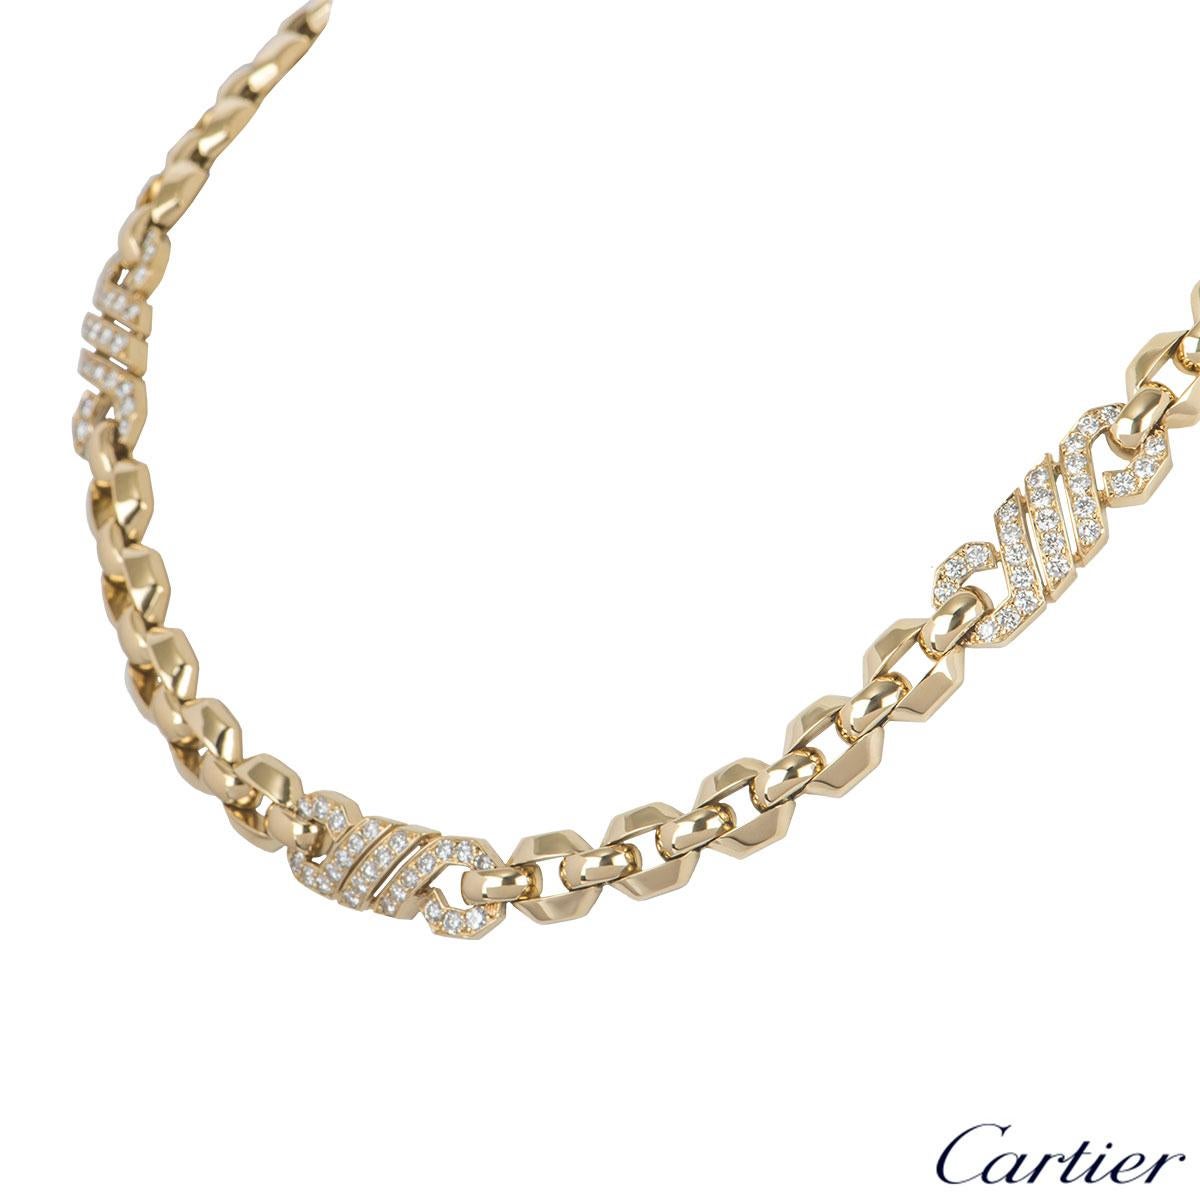 A beautiful 18k yellow gold and diamond necklace by Cartier. The necklace features octagonal links connected by 3 diamond plaques which are set with 75 round brilliant cut diamonds with an approximate weight of 3.00ct. The necklace has a box clasp